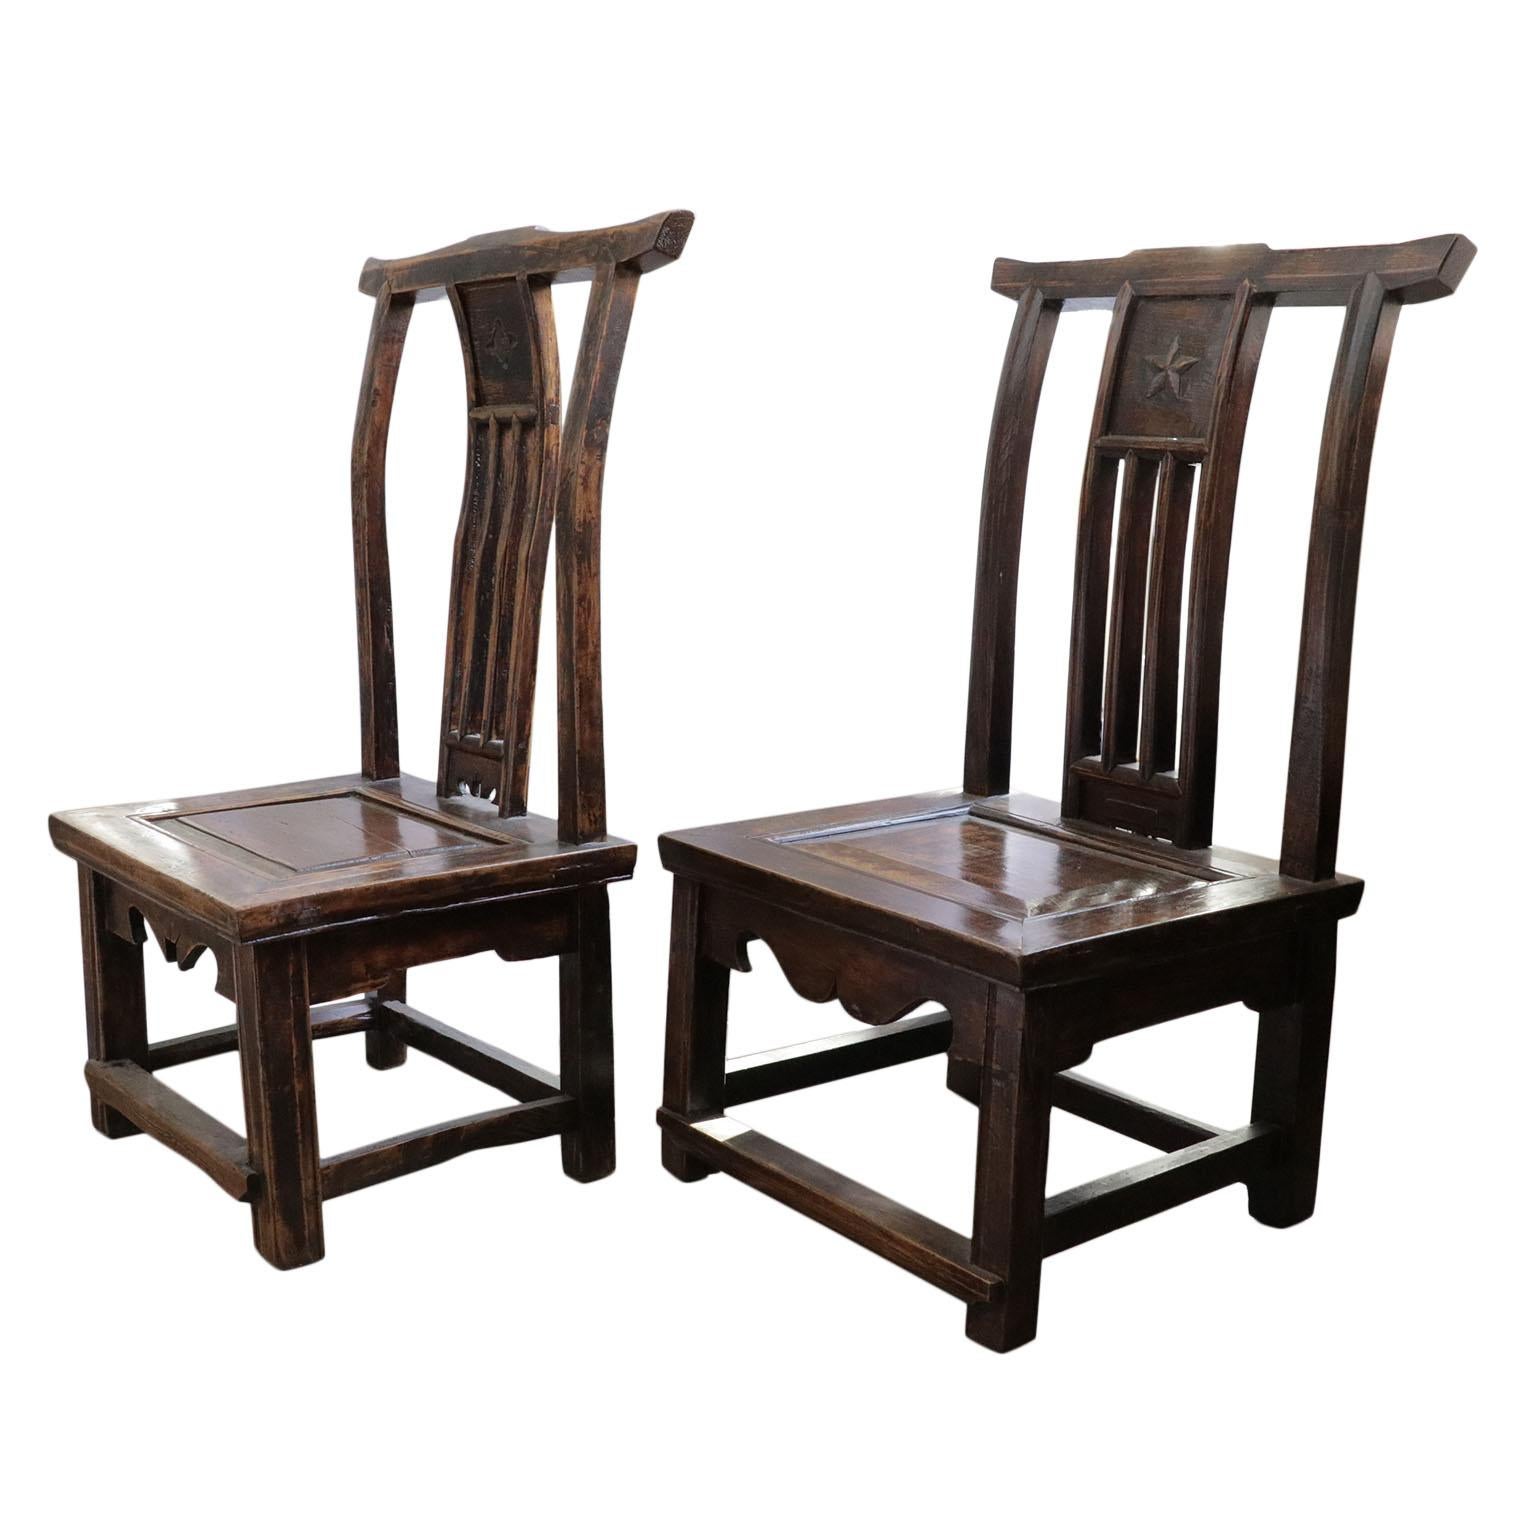 Antique Chinese Low Seating Chairs, Pair In Good Condition For Sale In San Francisco, CA